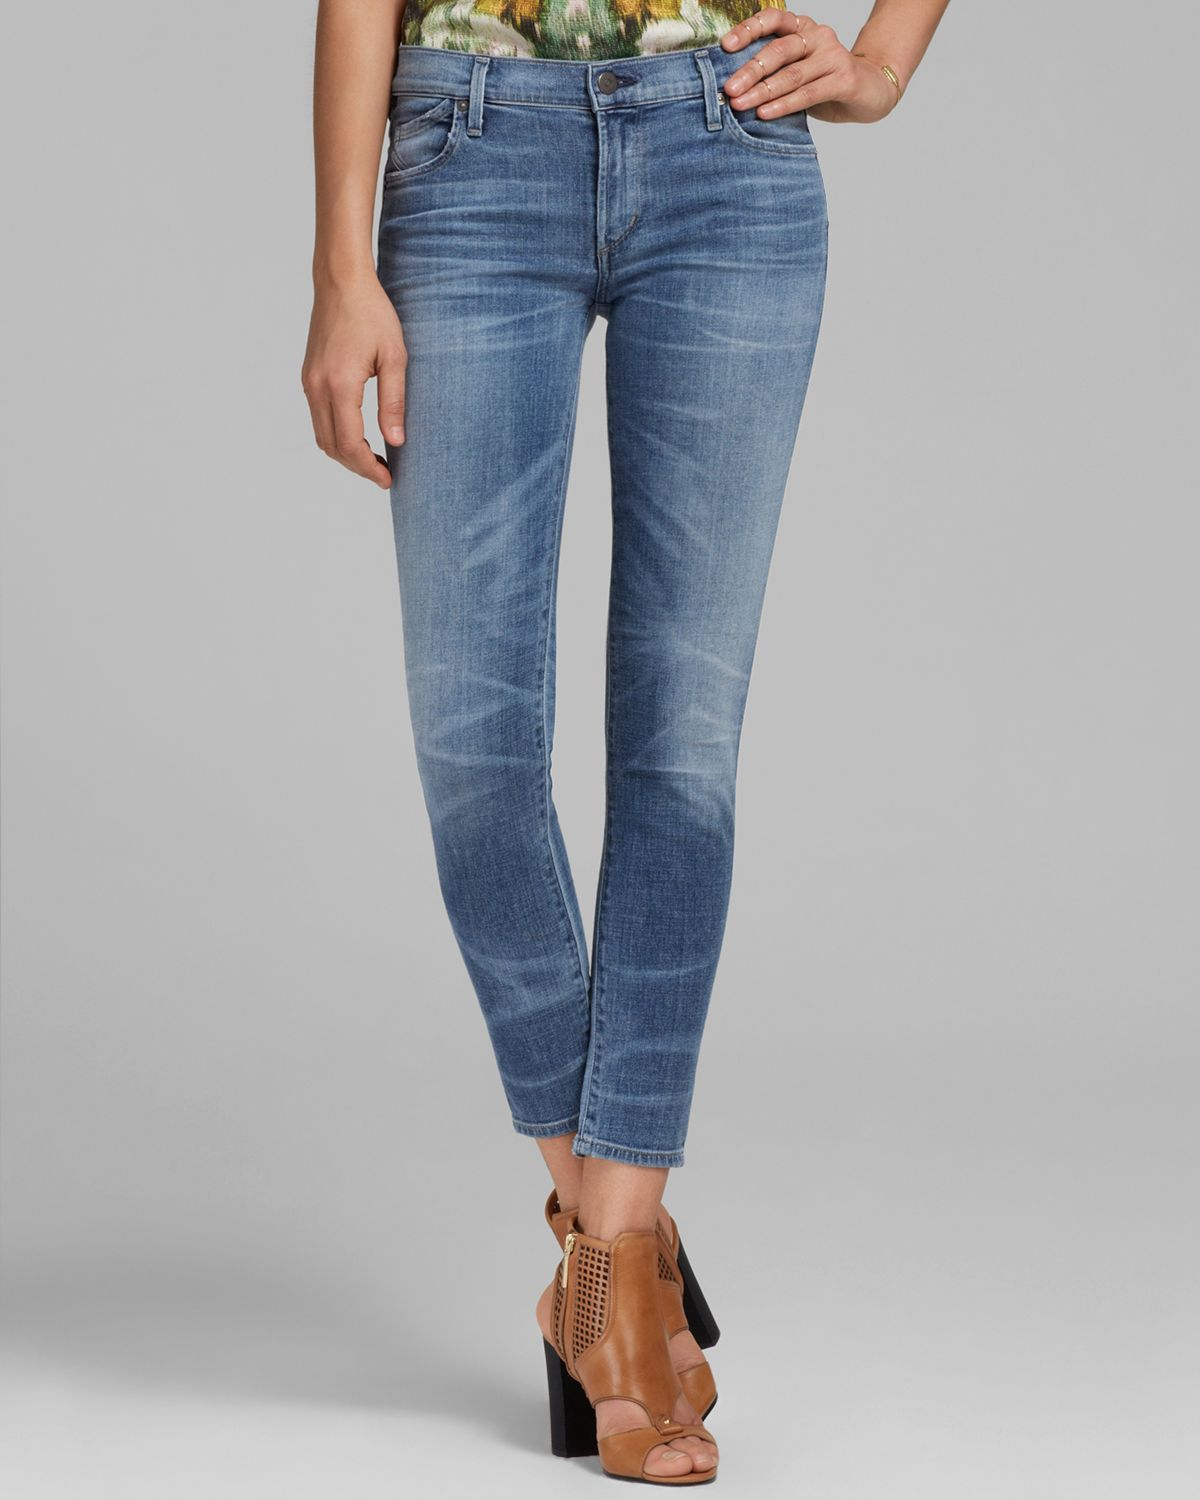 Citizens of Humanity Jeans - Avedon Ankle Skinny In Belize in Blue - Lyst